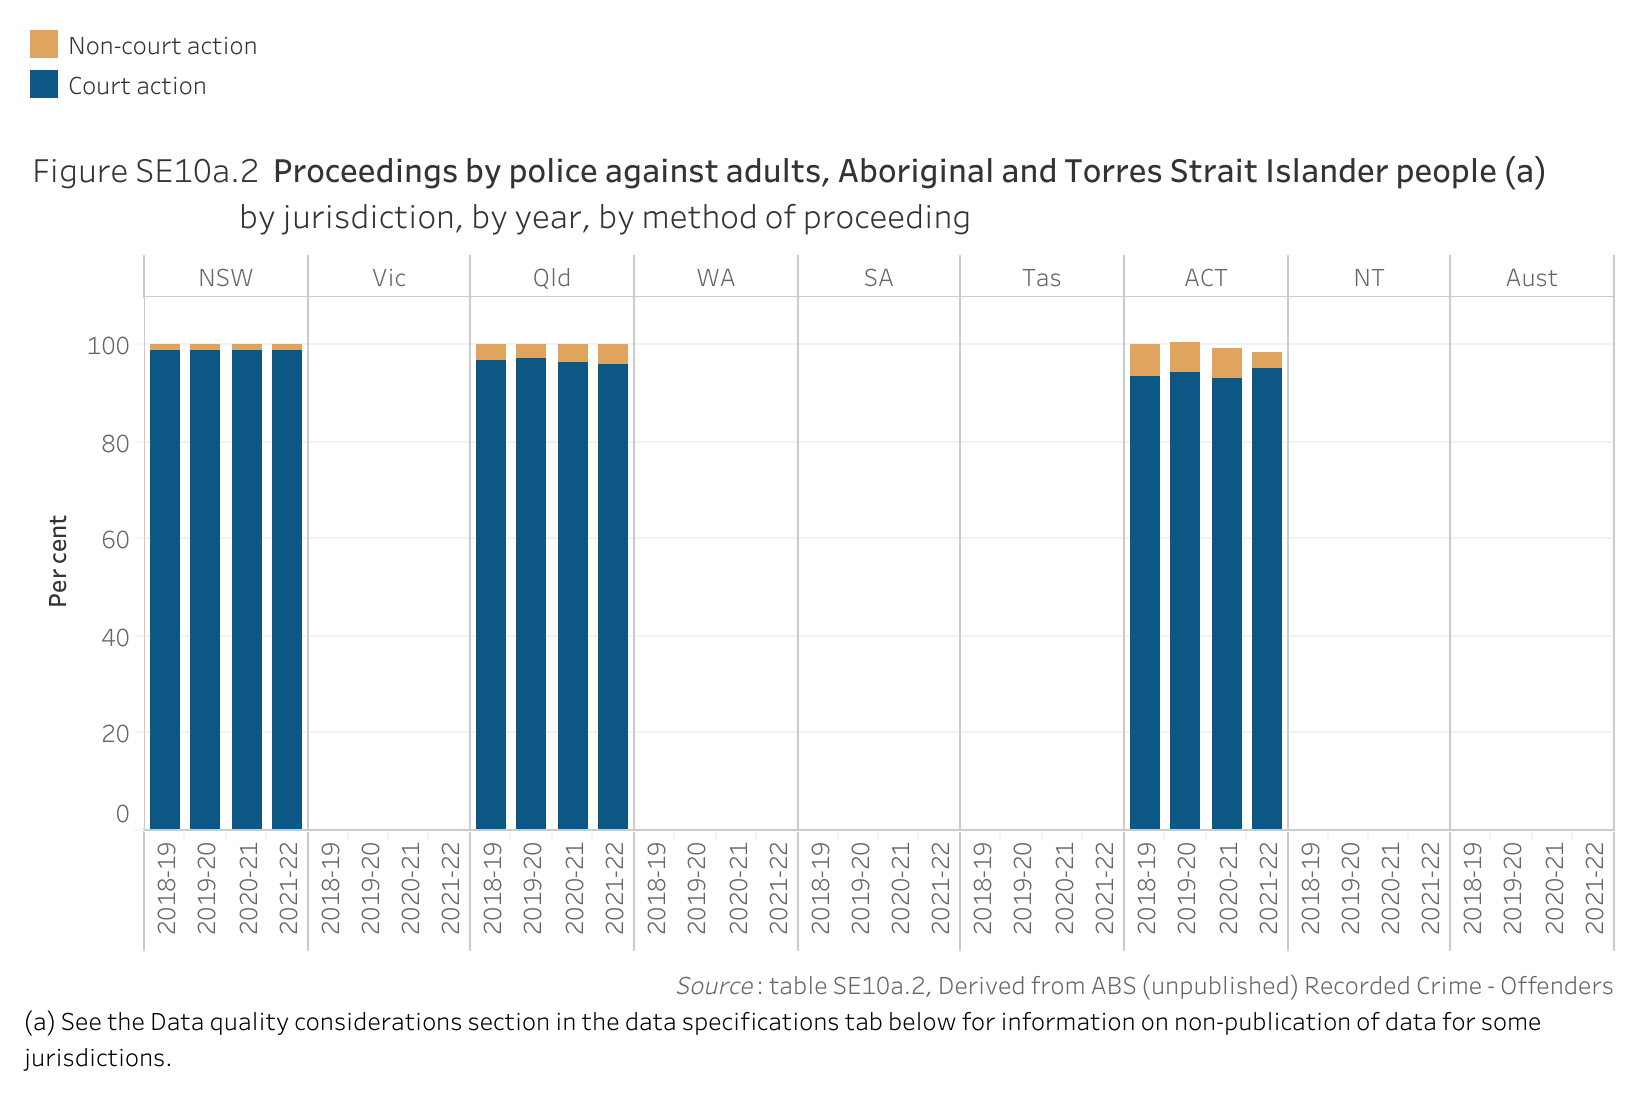 Figure SE10a.2 shows proceedings by police against adults, Aboriginal and Torres Strait Islander people, by jurisdiction, by year, by method of proceeding. More details can be found within the text near this image.